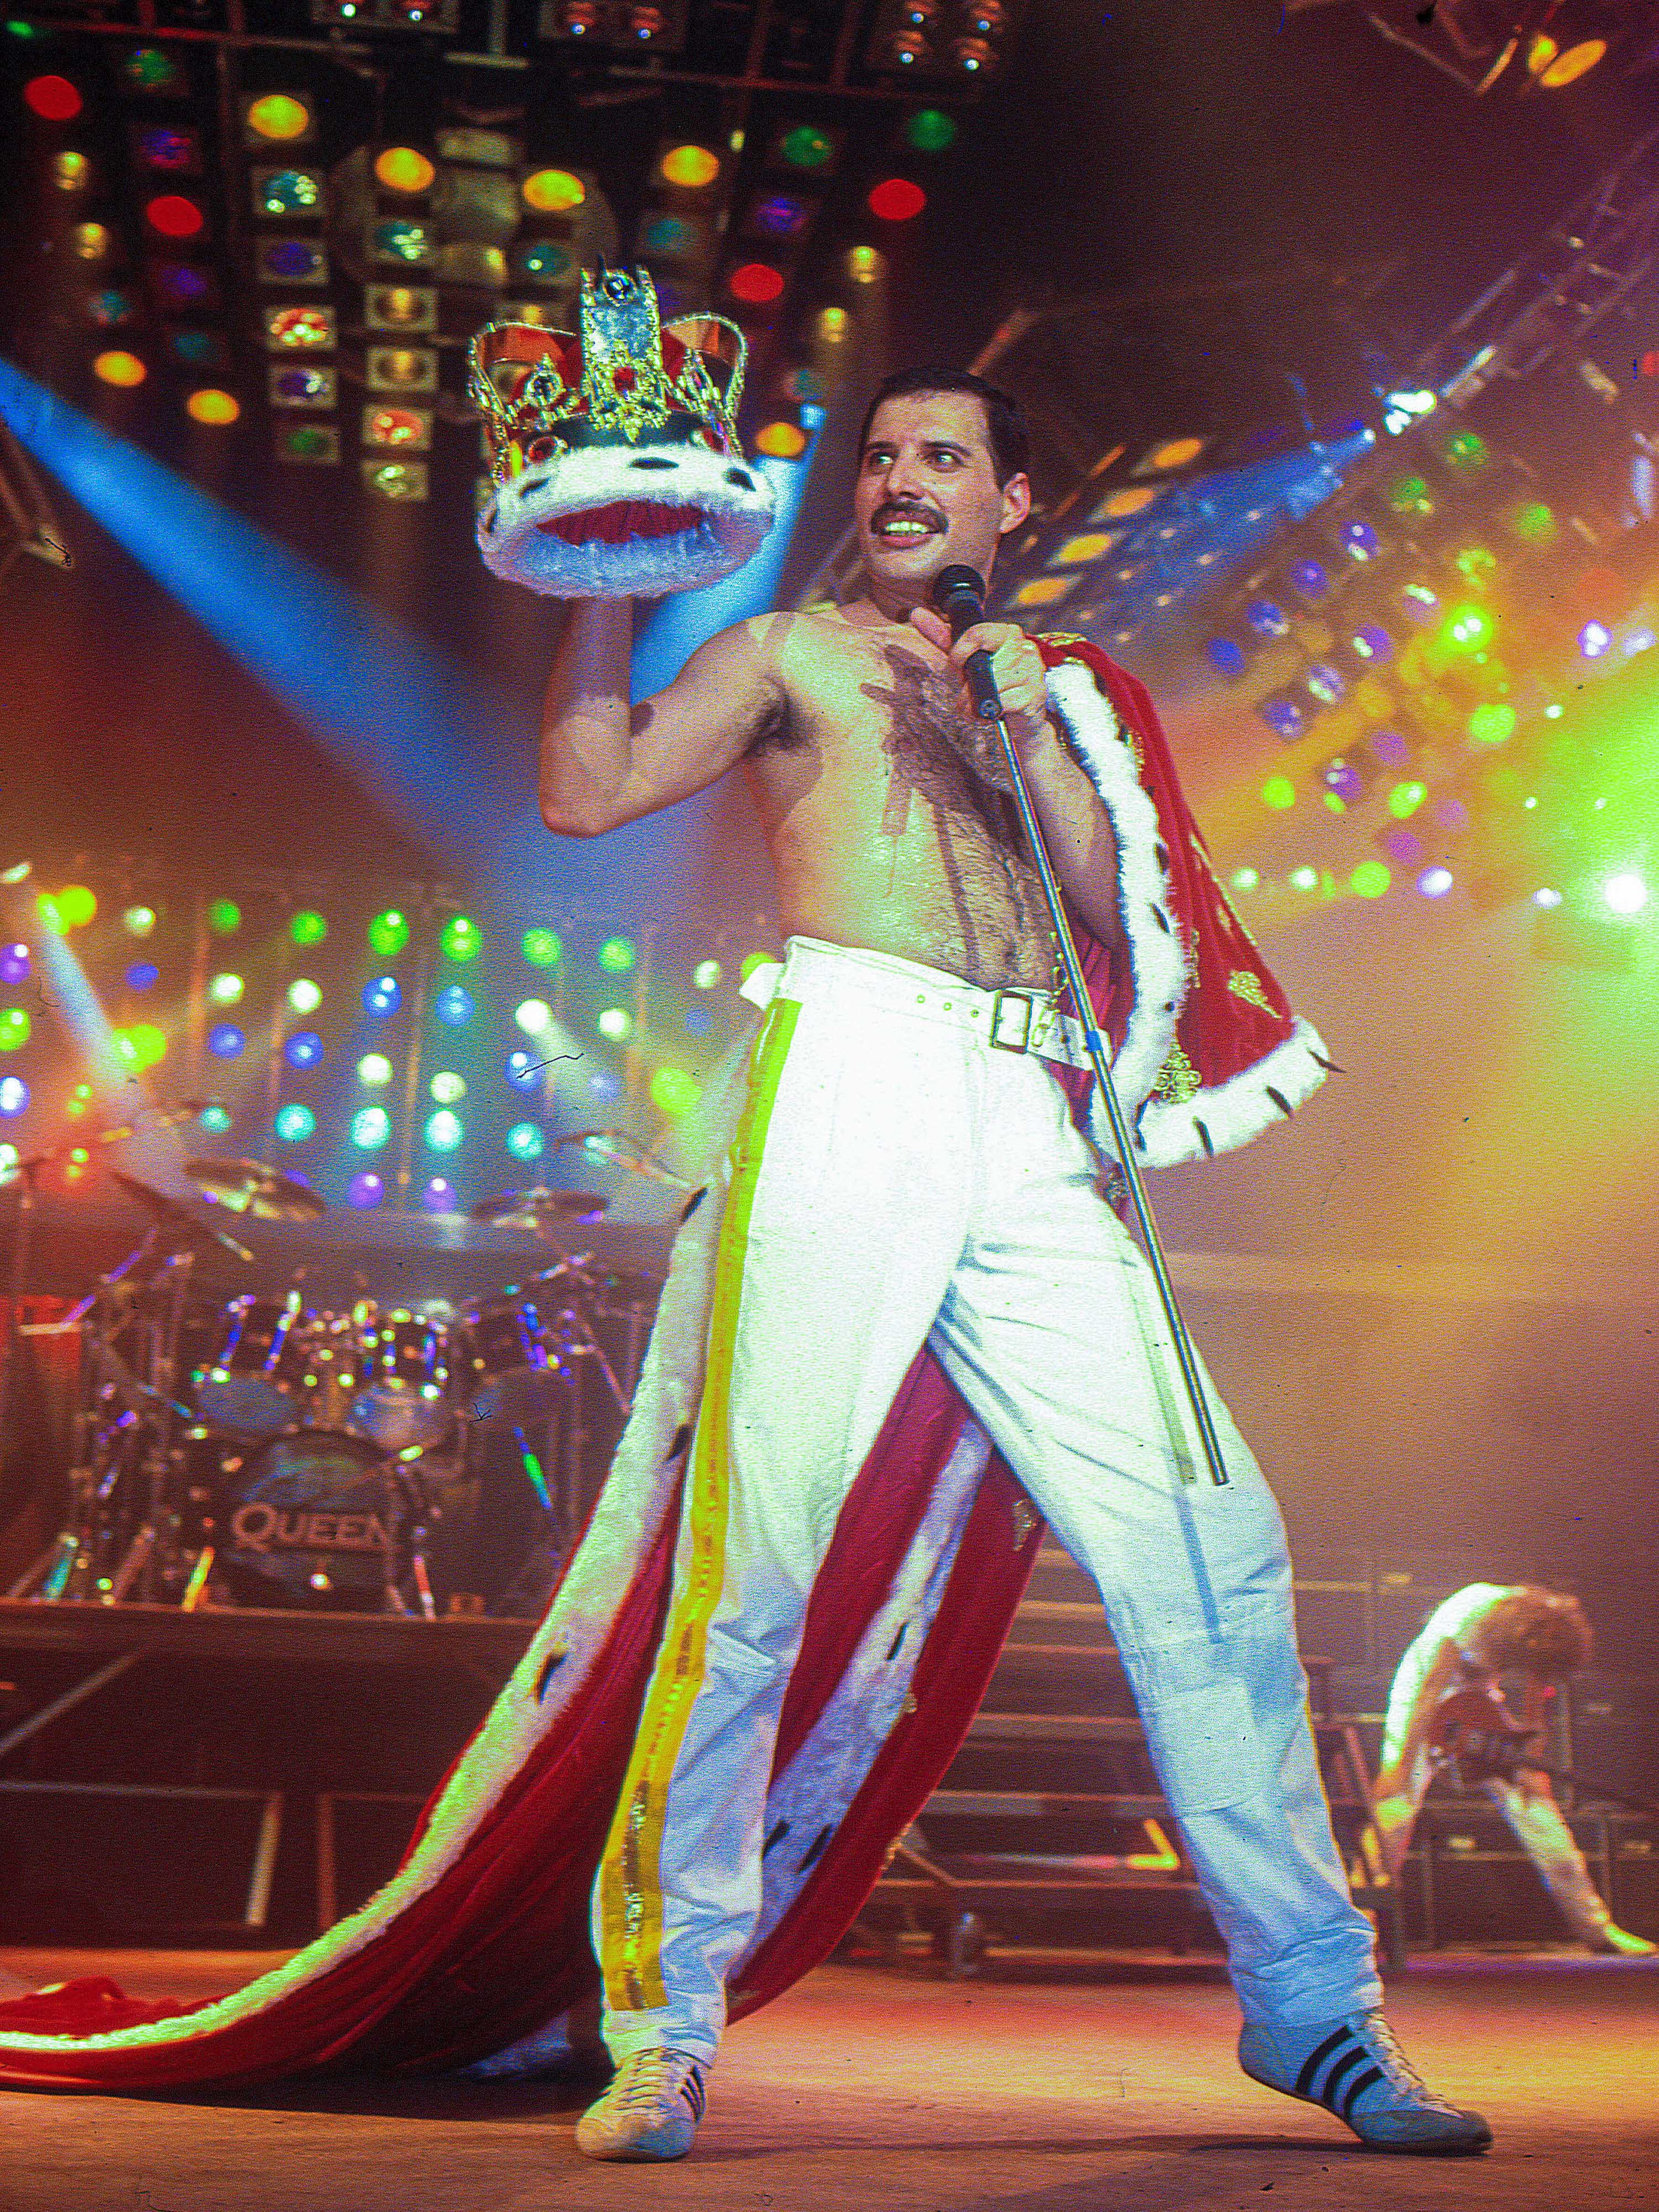 Rock legend Freddie Mercury's personal possessions are going up for auction